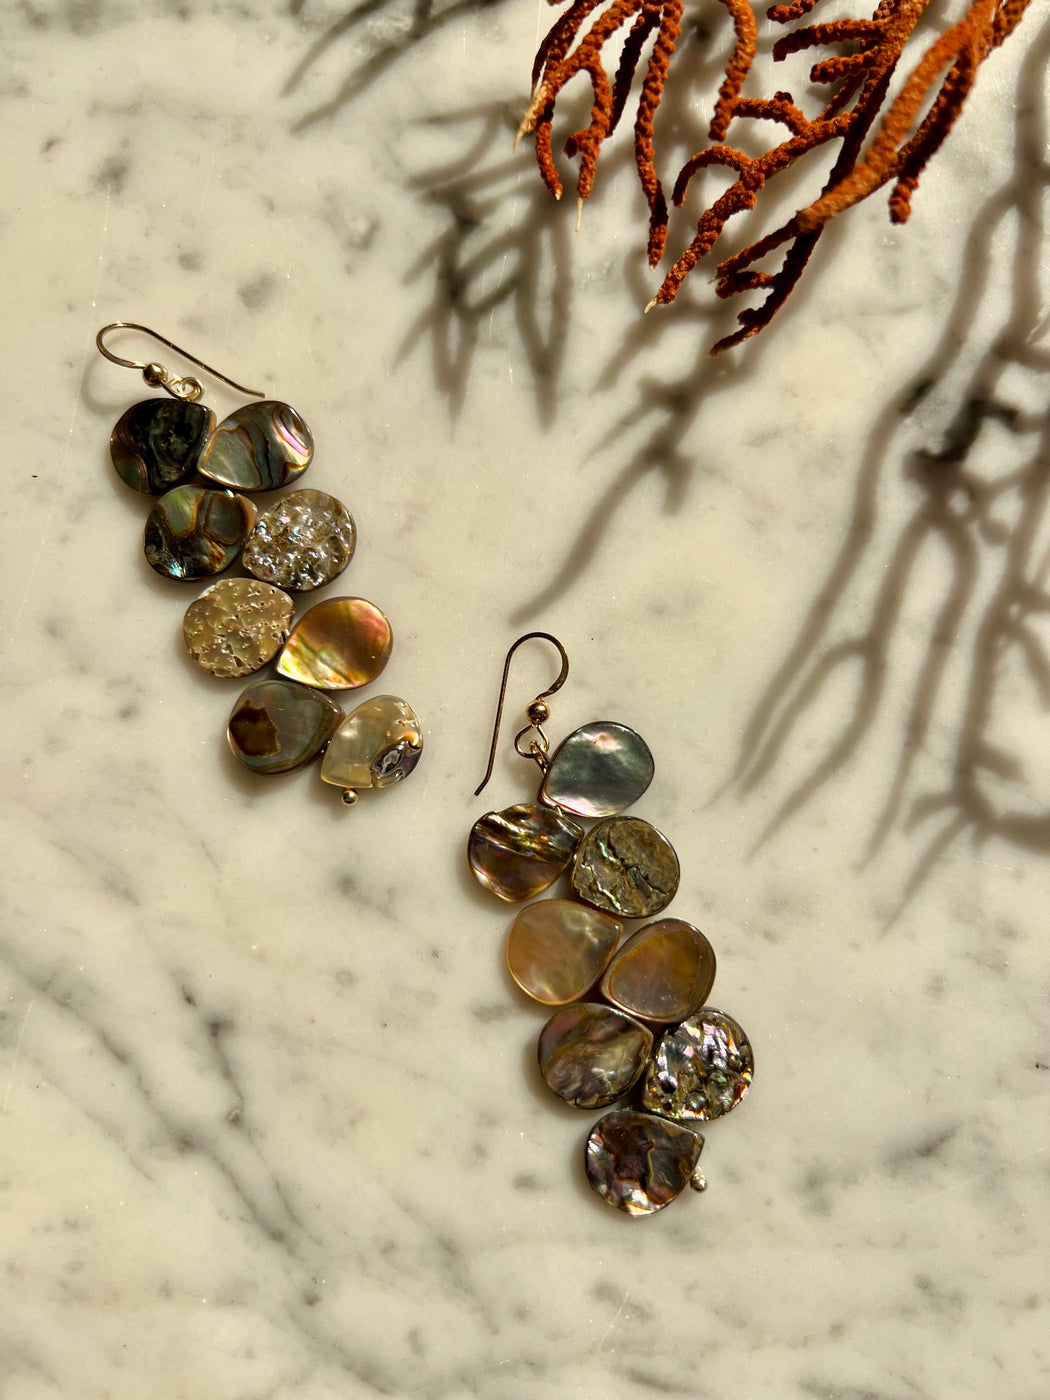 Stacked abalone earrings which flutter with movement as you wear them.  Materials Matter: farm raised abalone beads on gold fill ear wires.  Made by Badass Women for Badass People: Designed in California by Carrie Marill and made by hand in her SoCal studio.